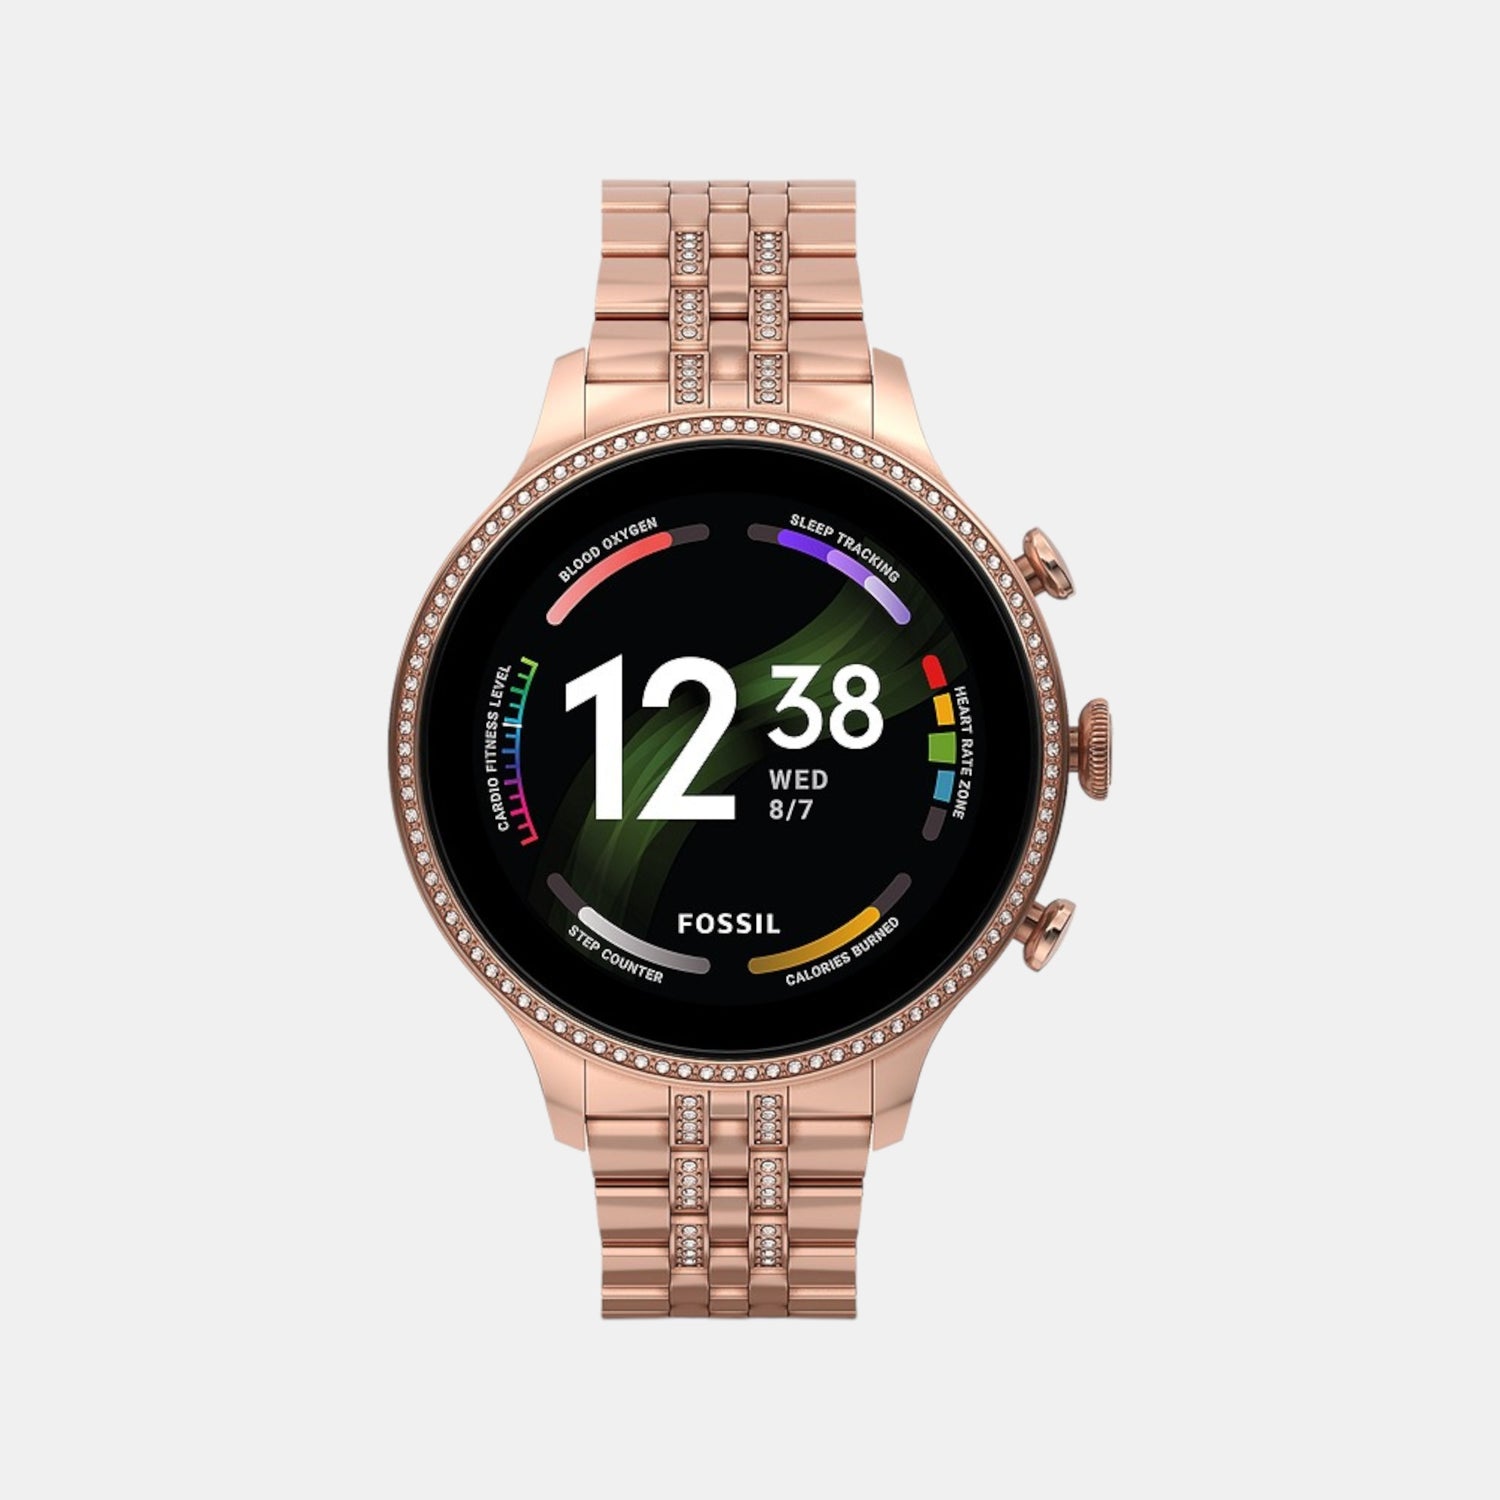 Buy Play Playfit Champ 2 Rose Gold TFT Display Smart Watch Sleep Monitor,  Blood Pressure Monitor Online in India at Best Prices